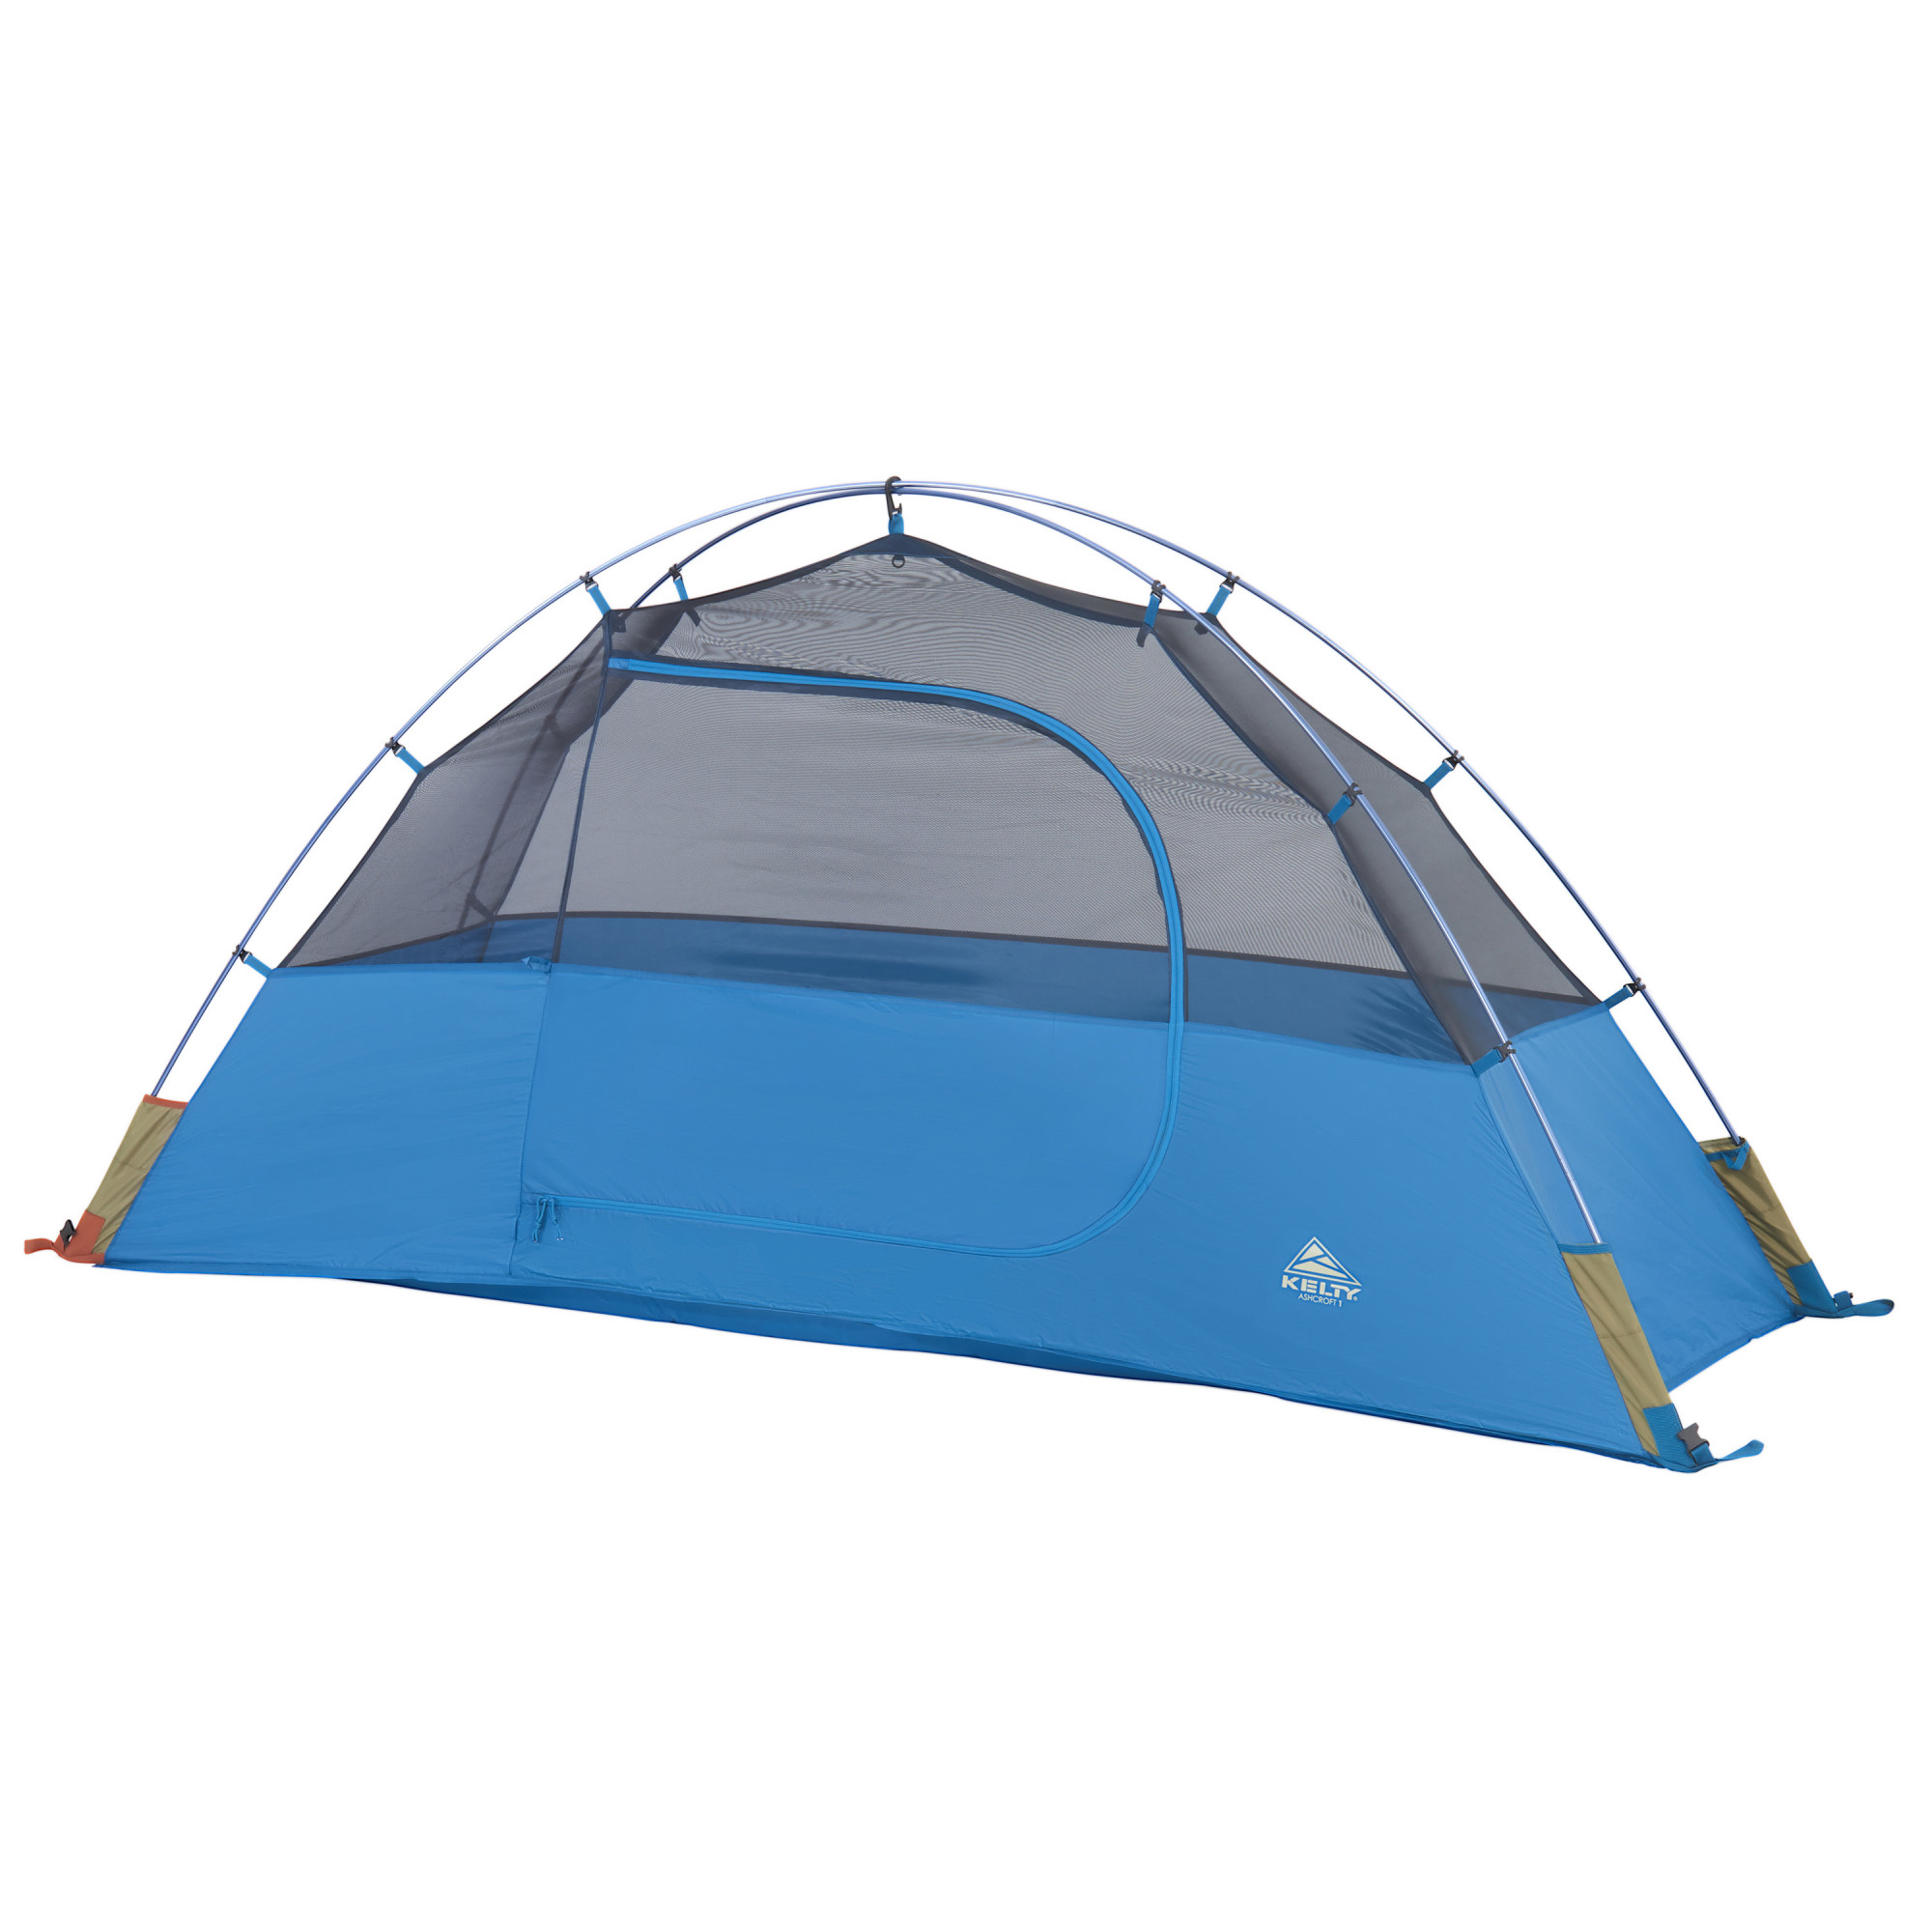 Kelty Ashcroft 1 tent, front view, no fly